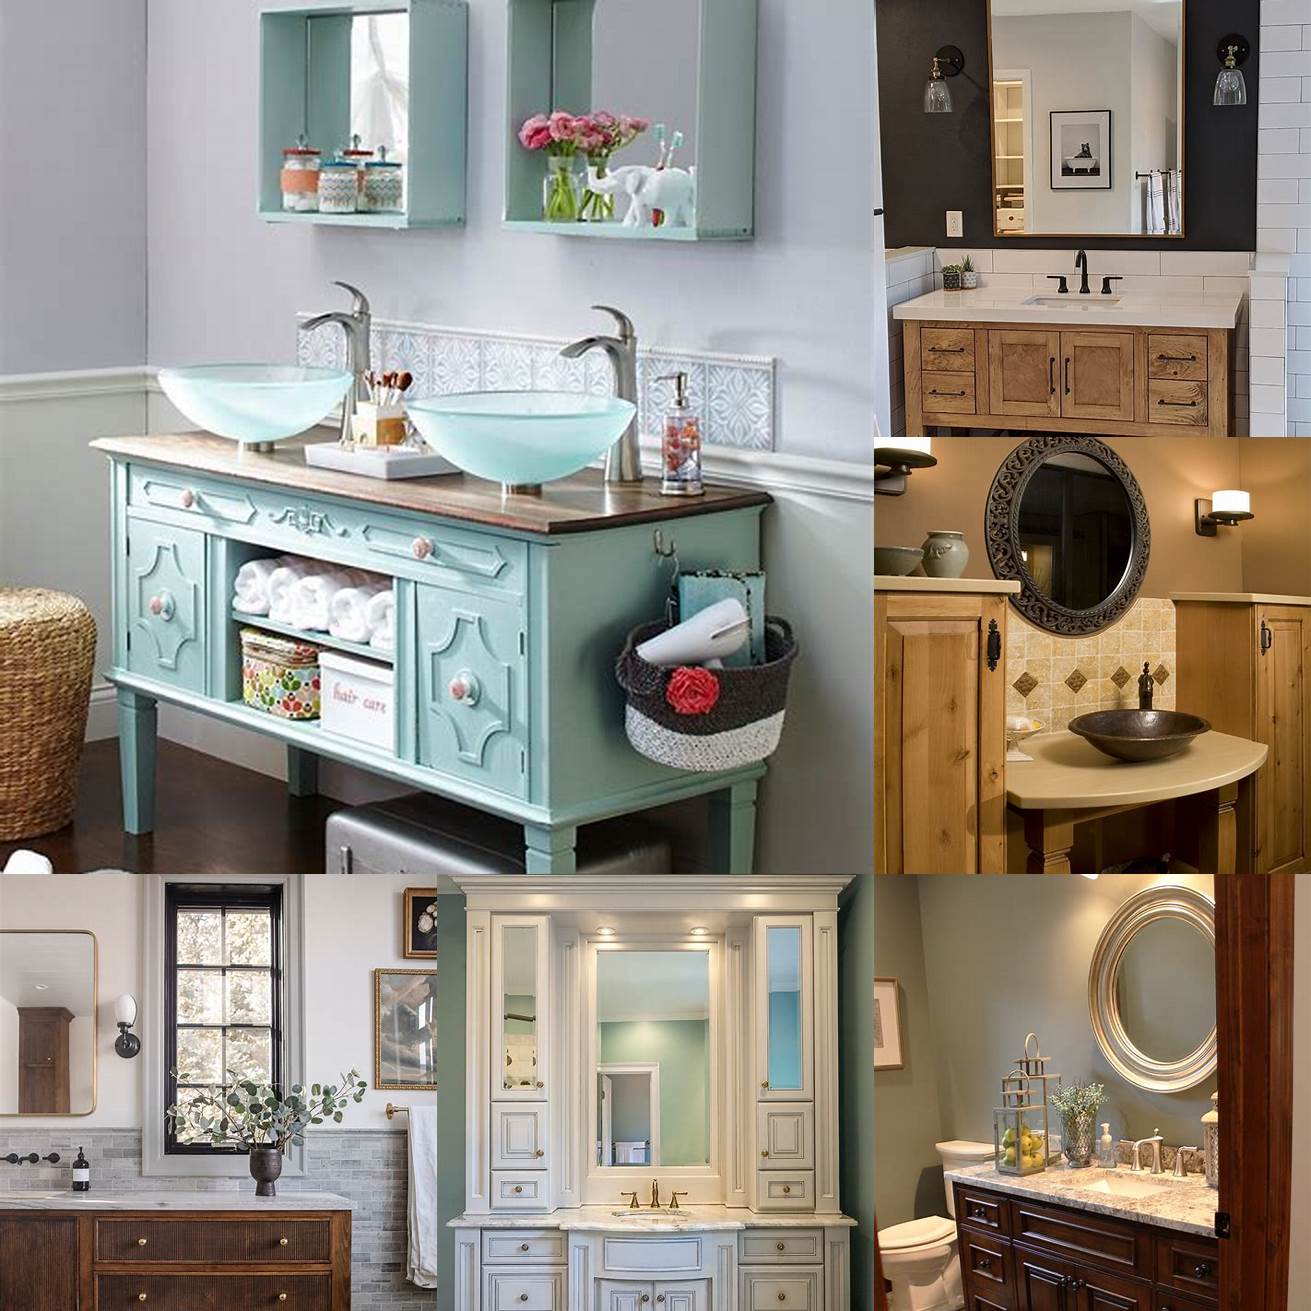 A custom vanity allows you to create a unique and personalized look for your bathroom